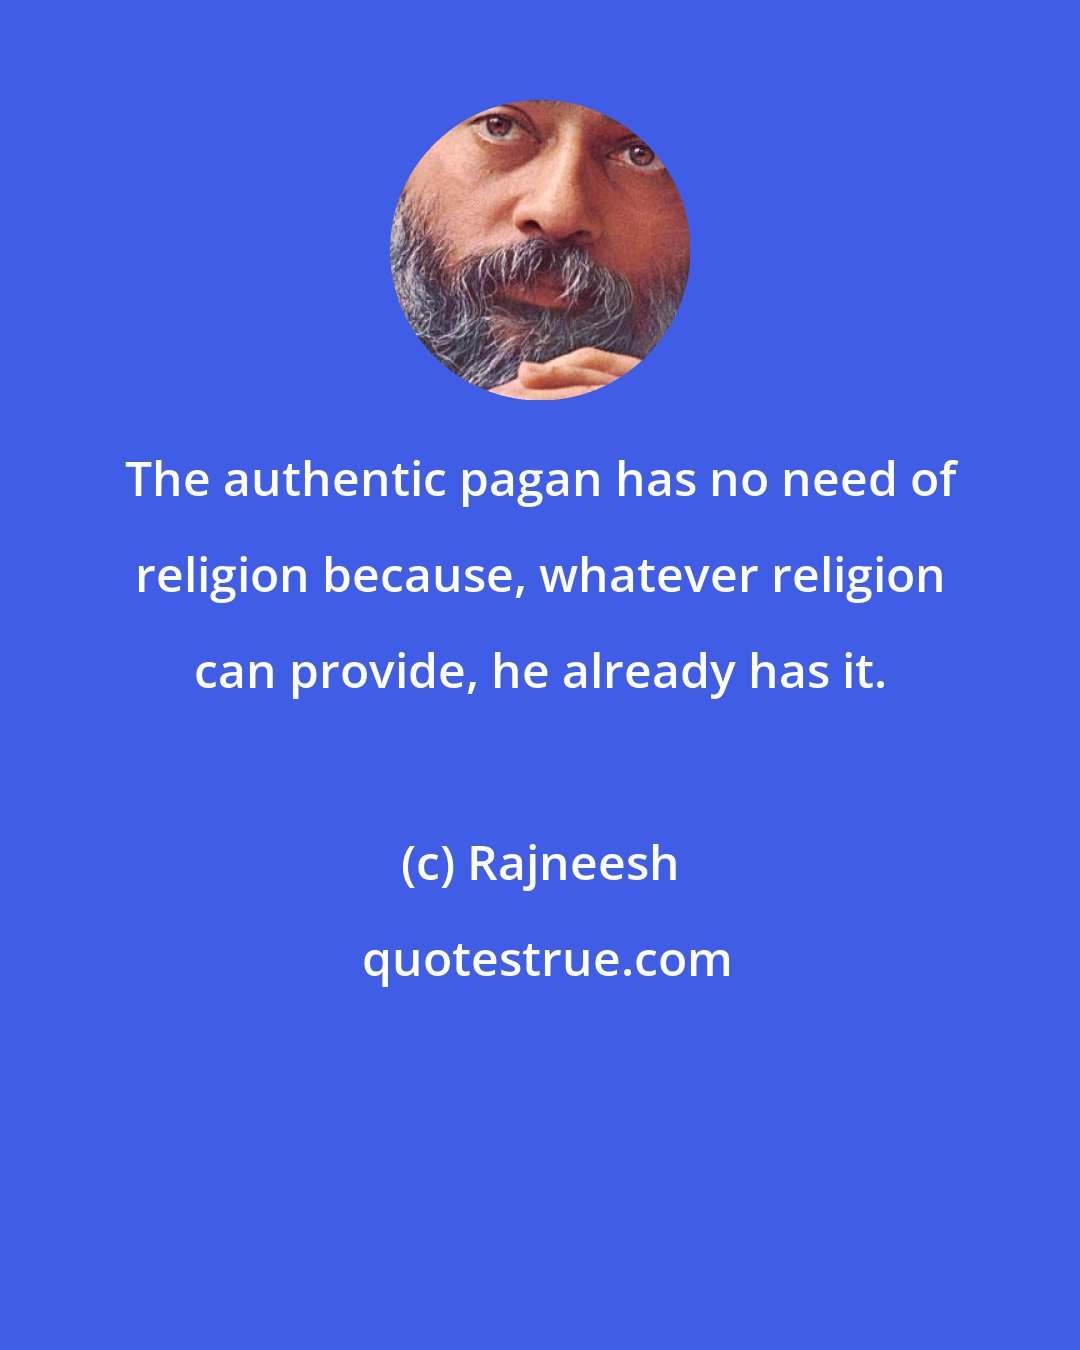 Rajneesh: The authentic pagan has no need of religion because, whatever religion can provide, he already has it.